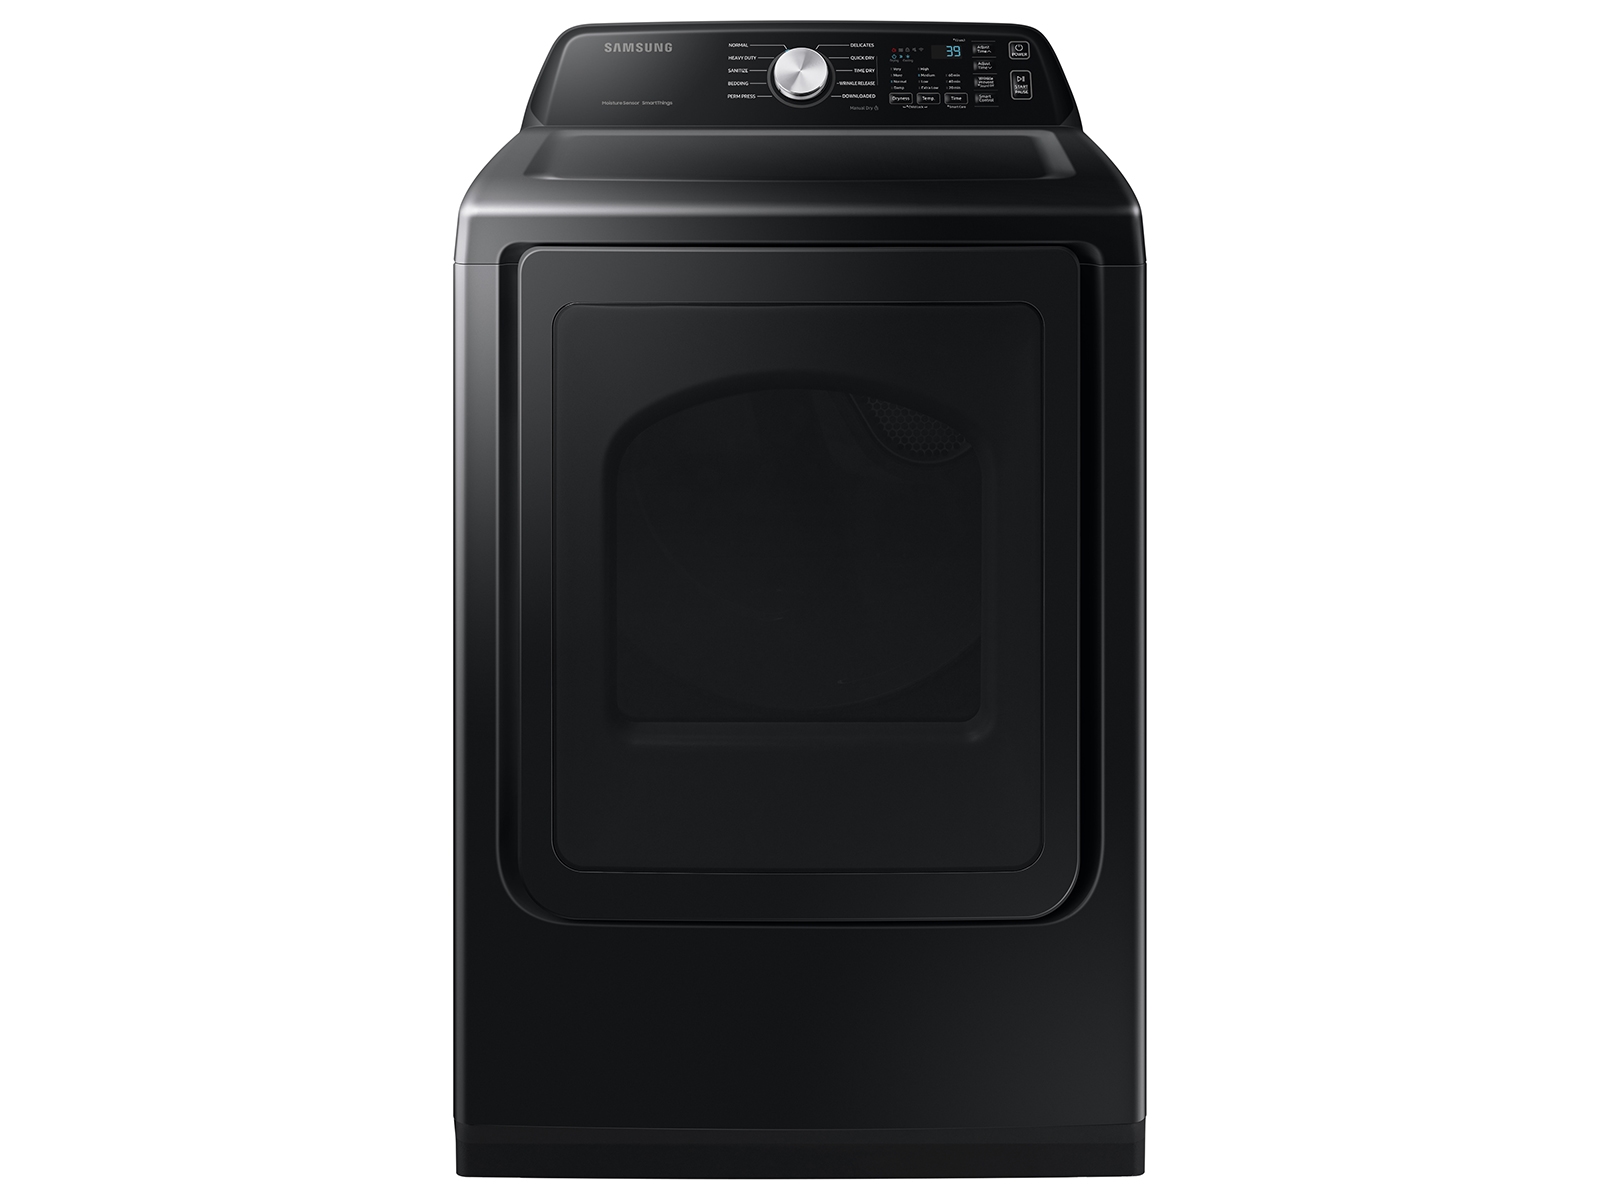 Photos - Tumble Dryer Samsung 7.4 cu. ft. Smart Gas Dryer with Sensor Dry in Brushed Black(DVG47 